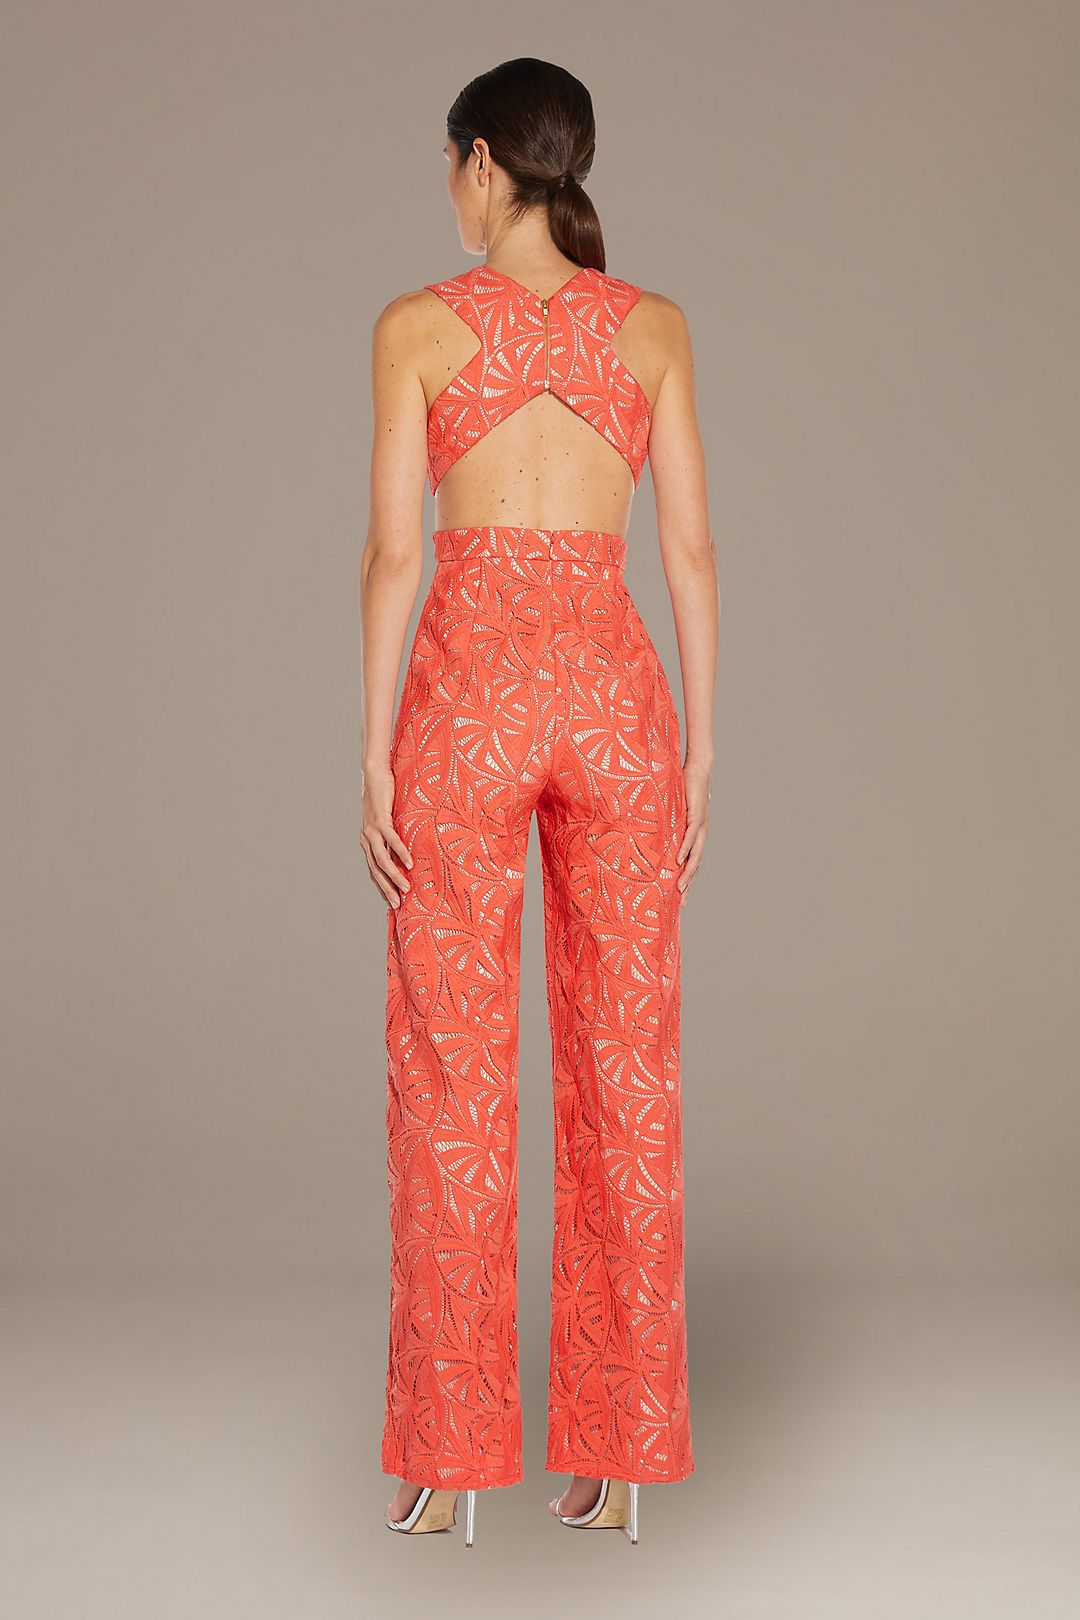 Lace Applique Sleeveless Jumpsuit with Open Back Image 2